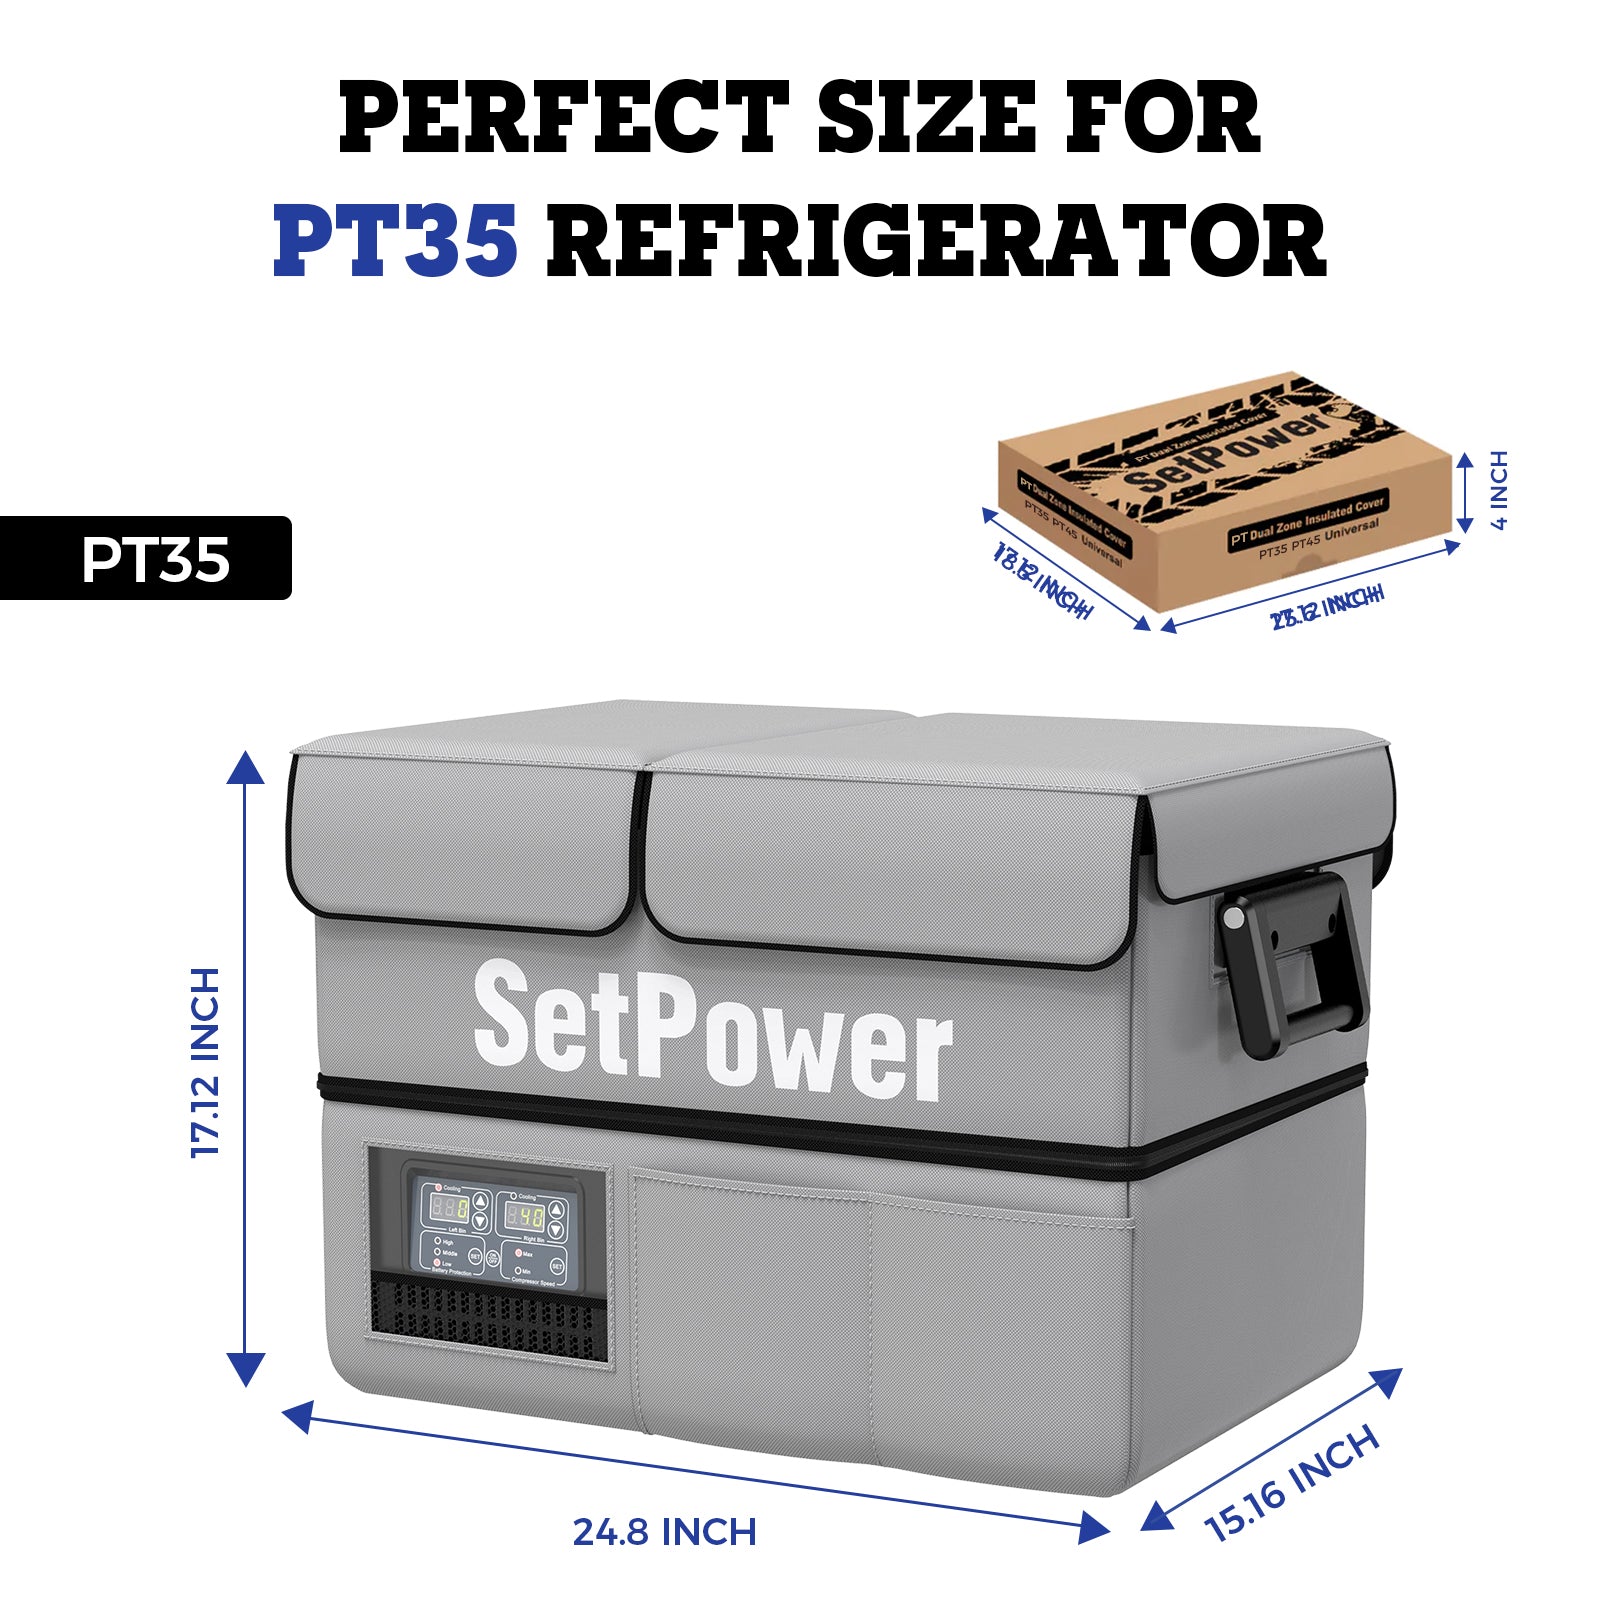 Setpower Insulated Protective Cover For PT35/45/55 Fridge | Ship Out May 8th